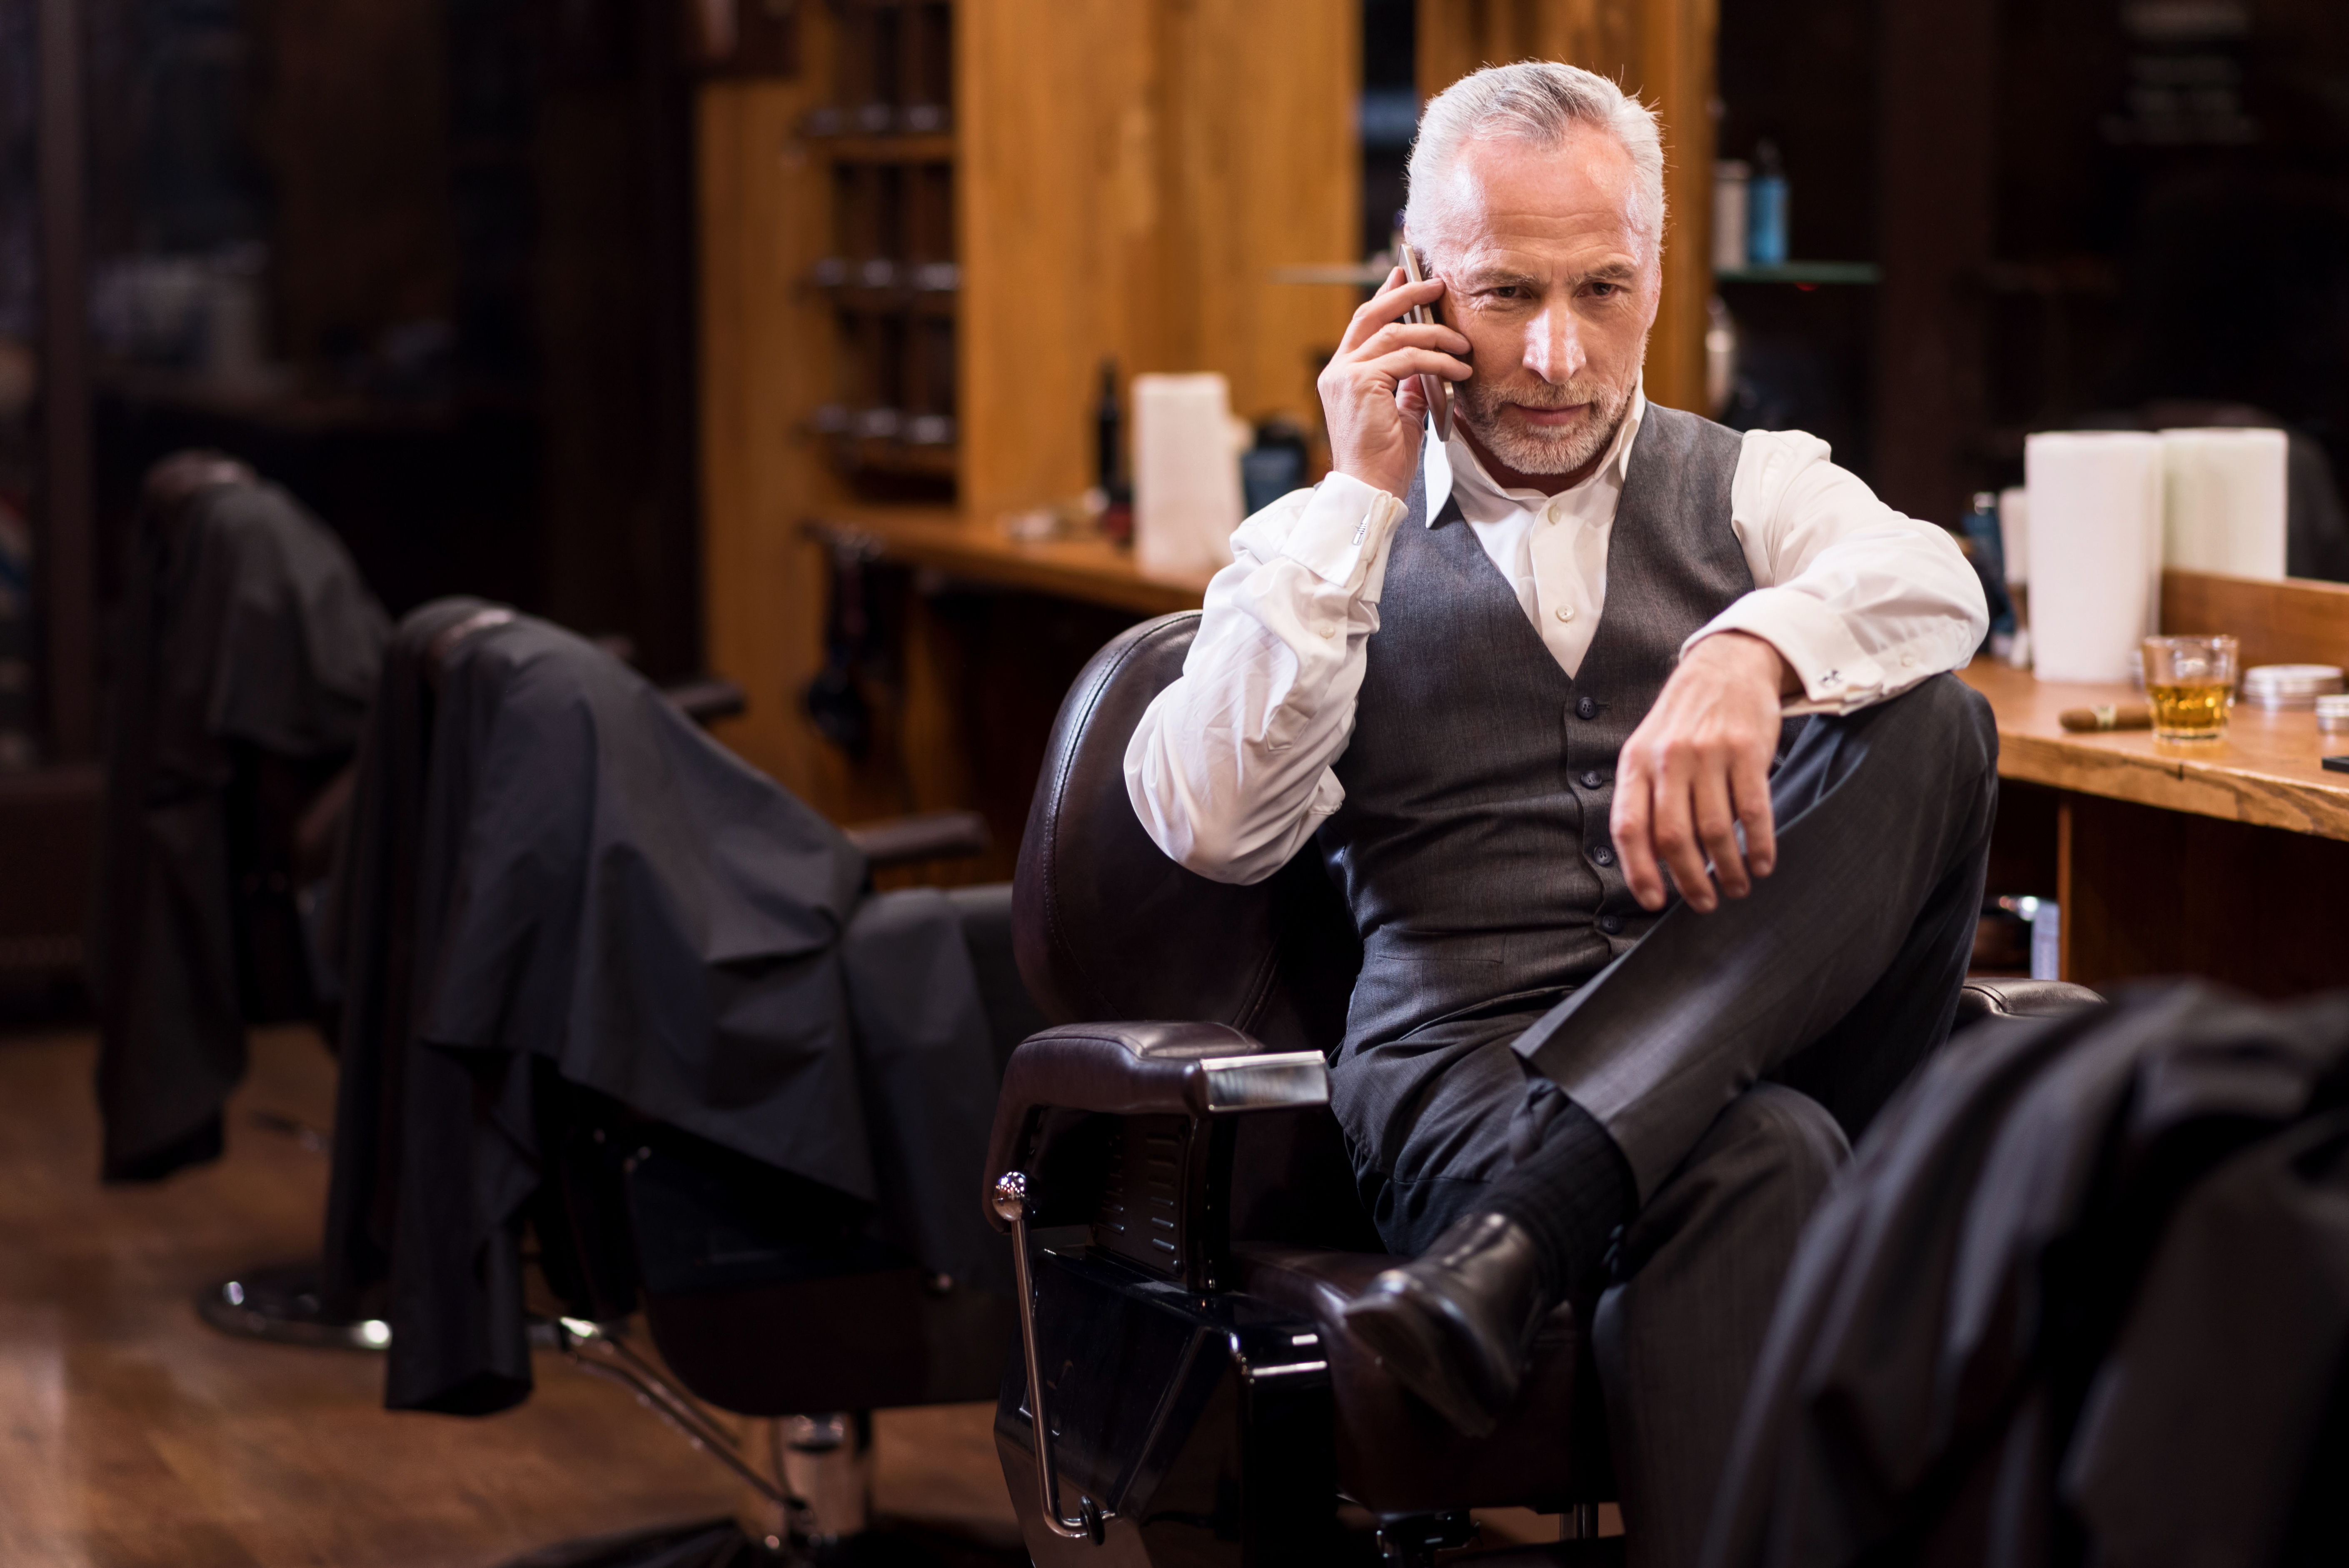 Business sitting man talking on mobile phone. | Source: Shutterstock